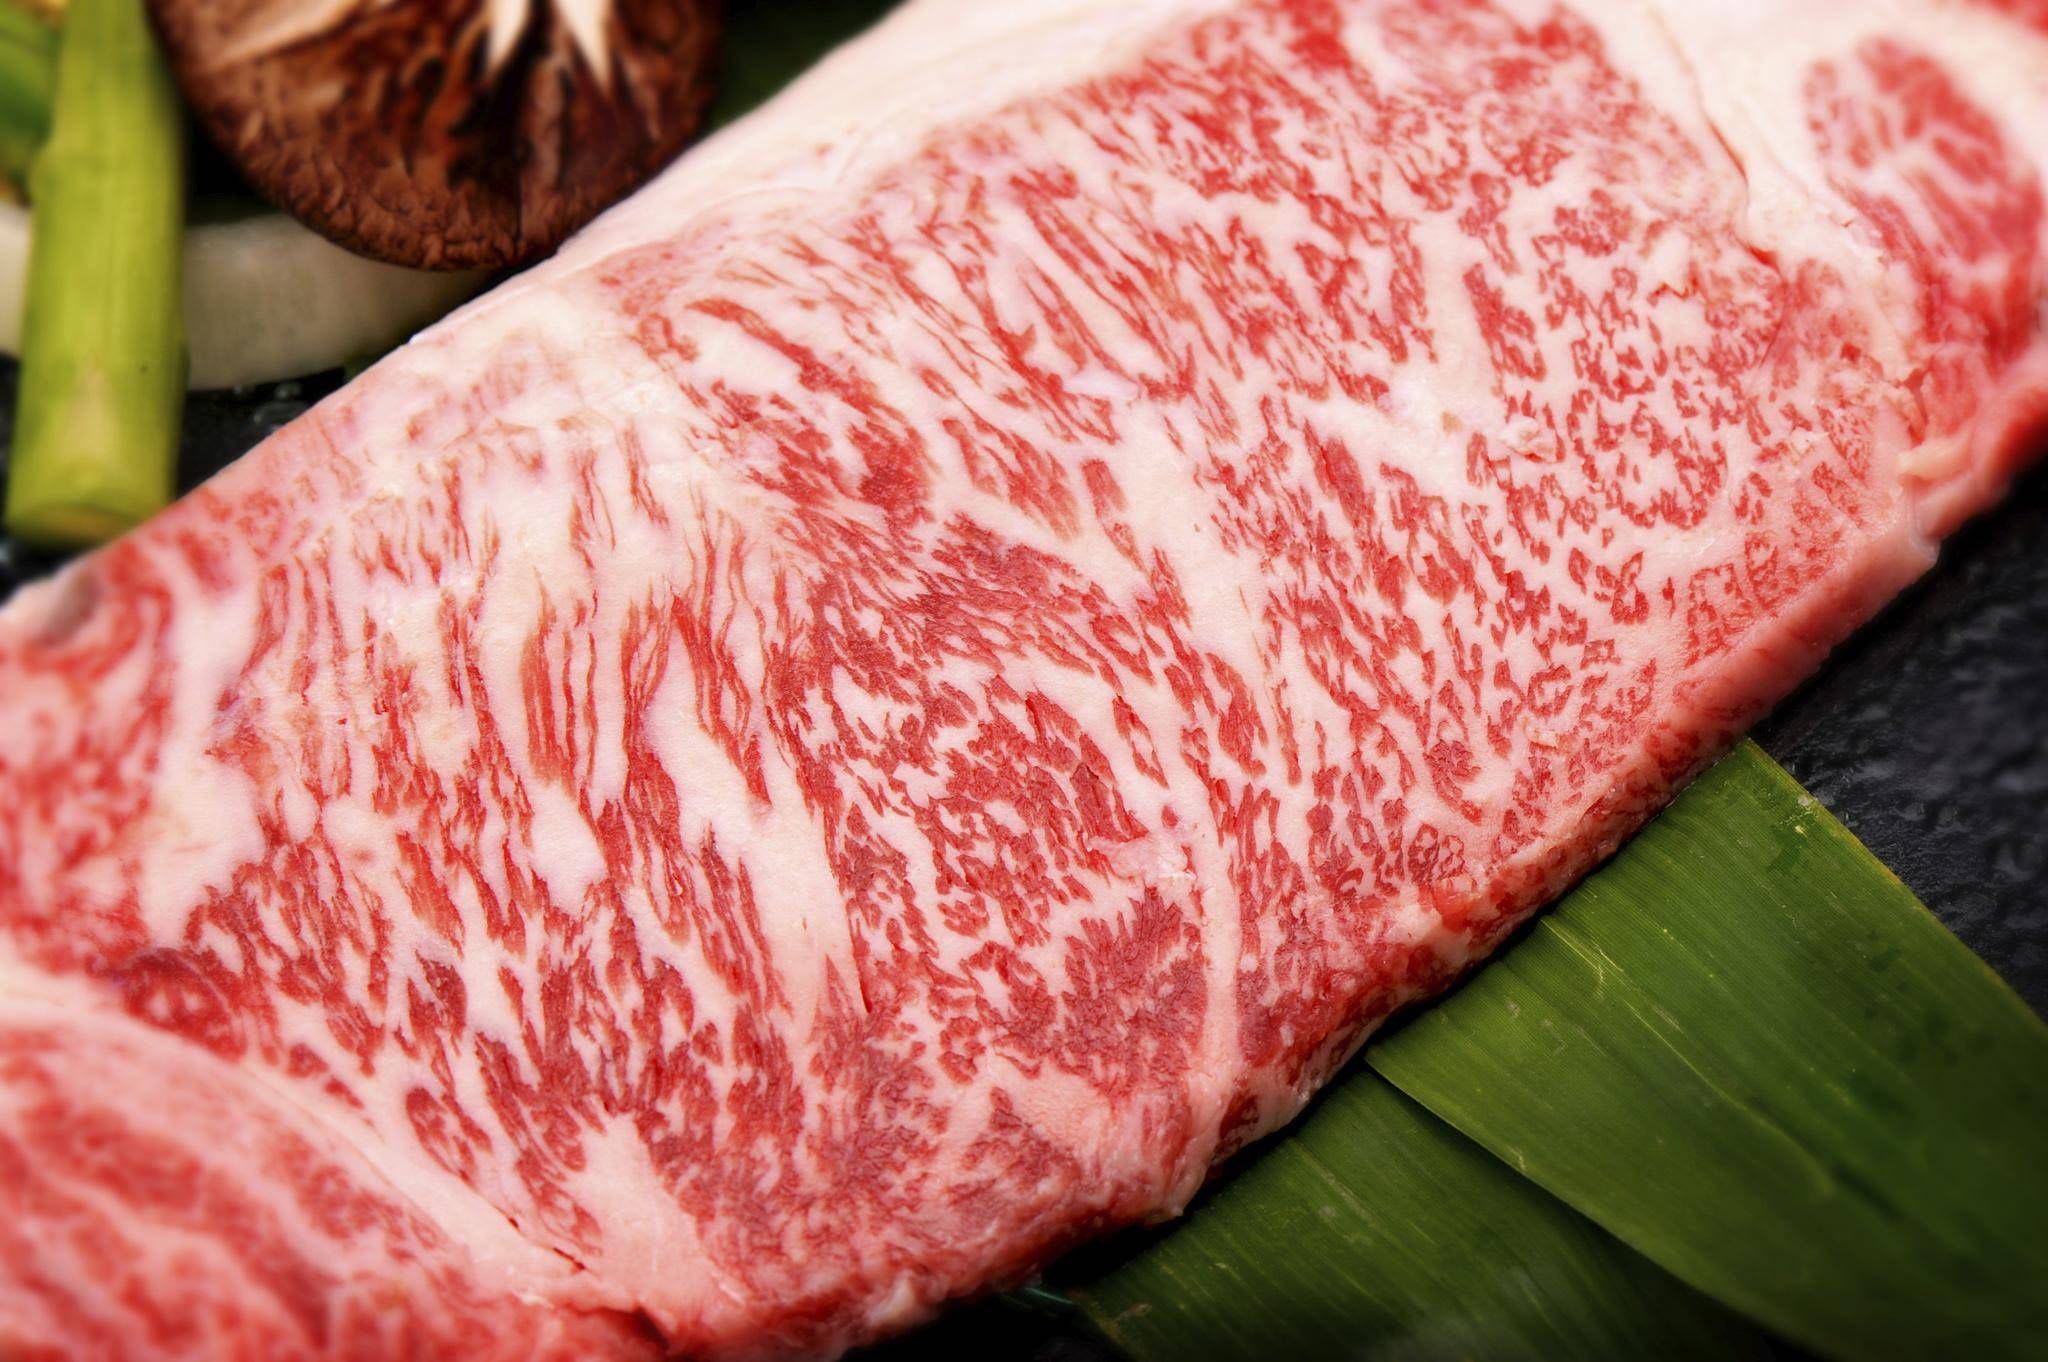 Why Do You Think Wagyu Beef Is So Expensive?